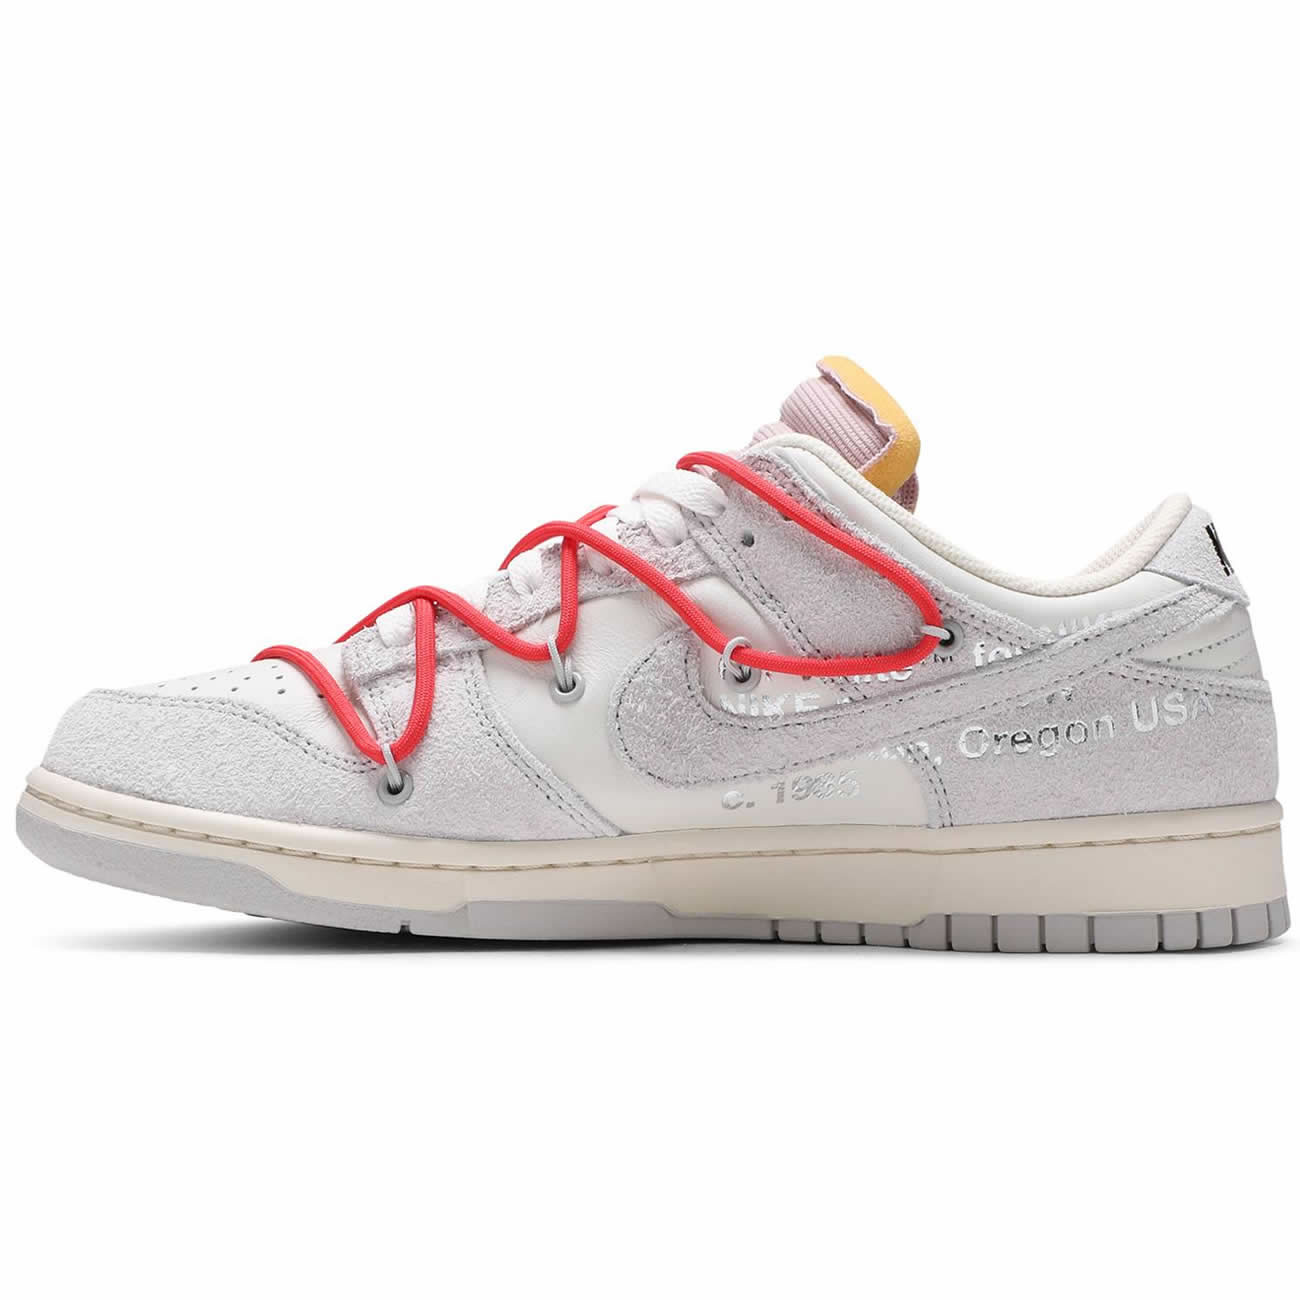 Off White Nike Sb Dunk Low Lot 33 Of 50 Sail Neutral Grey Chile Red Dj0950 118 (1) - newkick.org